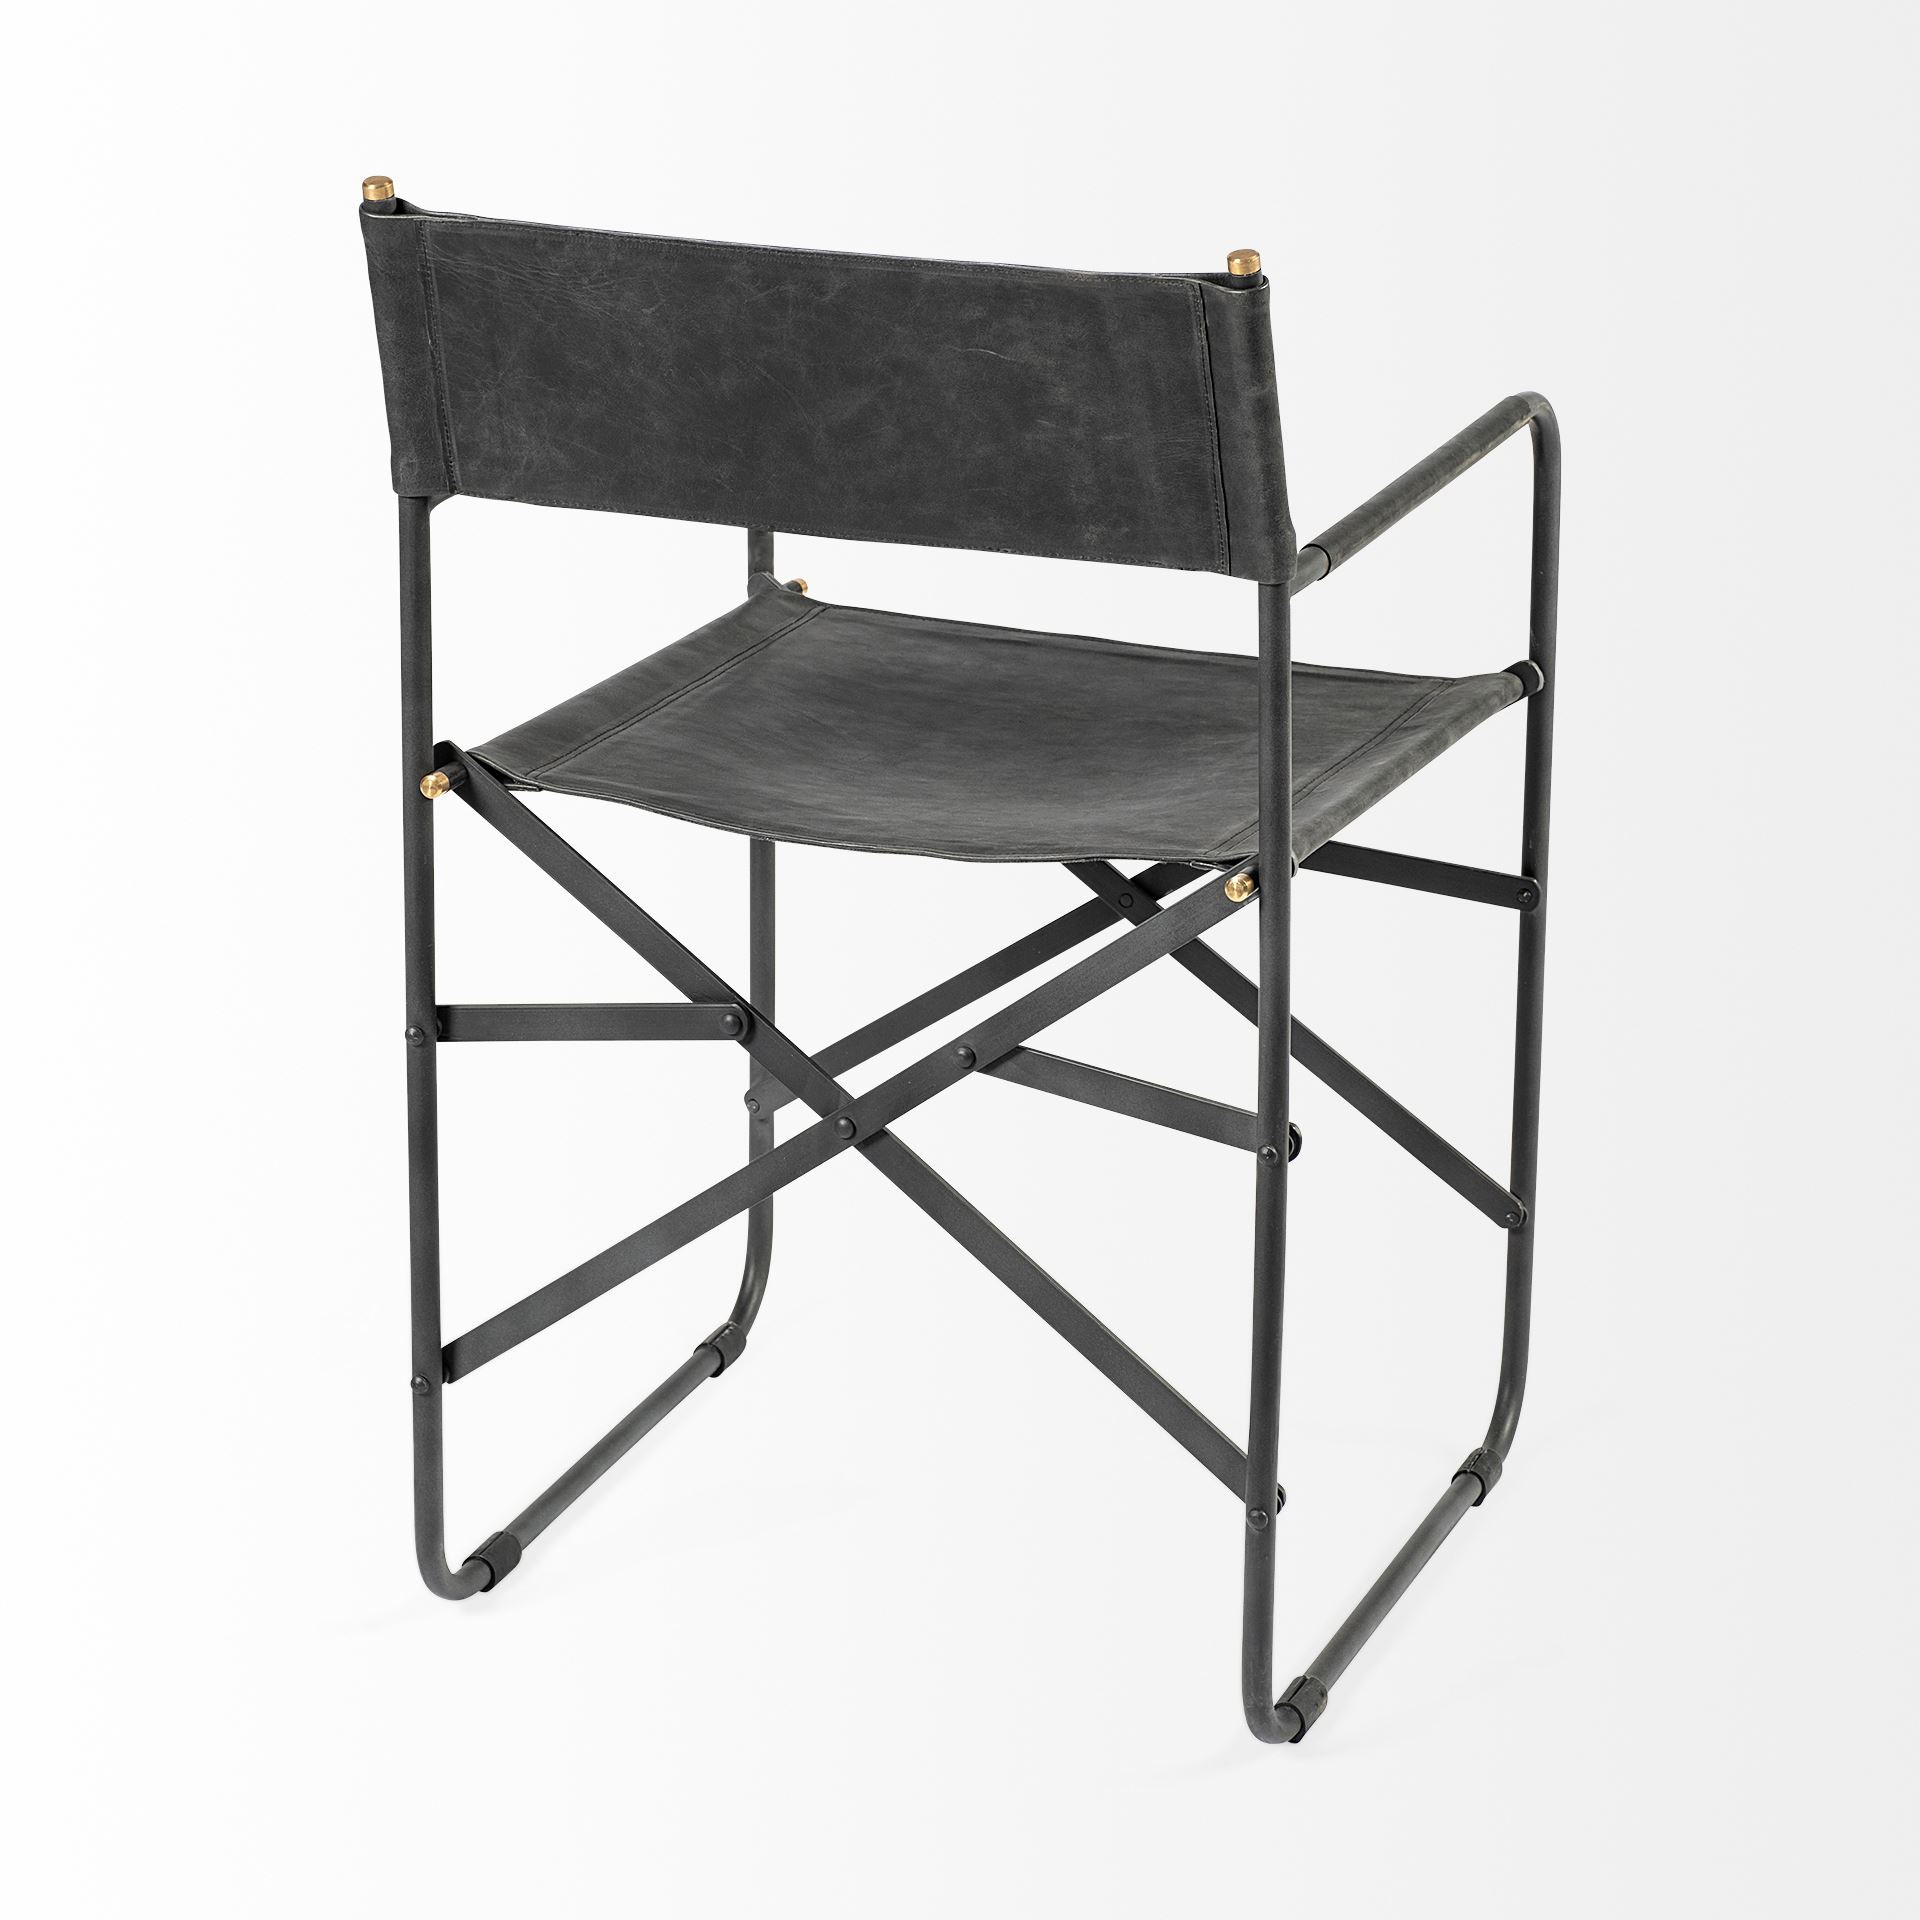 Black Leather with Black Iron Frame Dining Chair